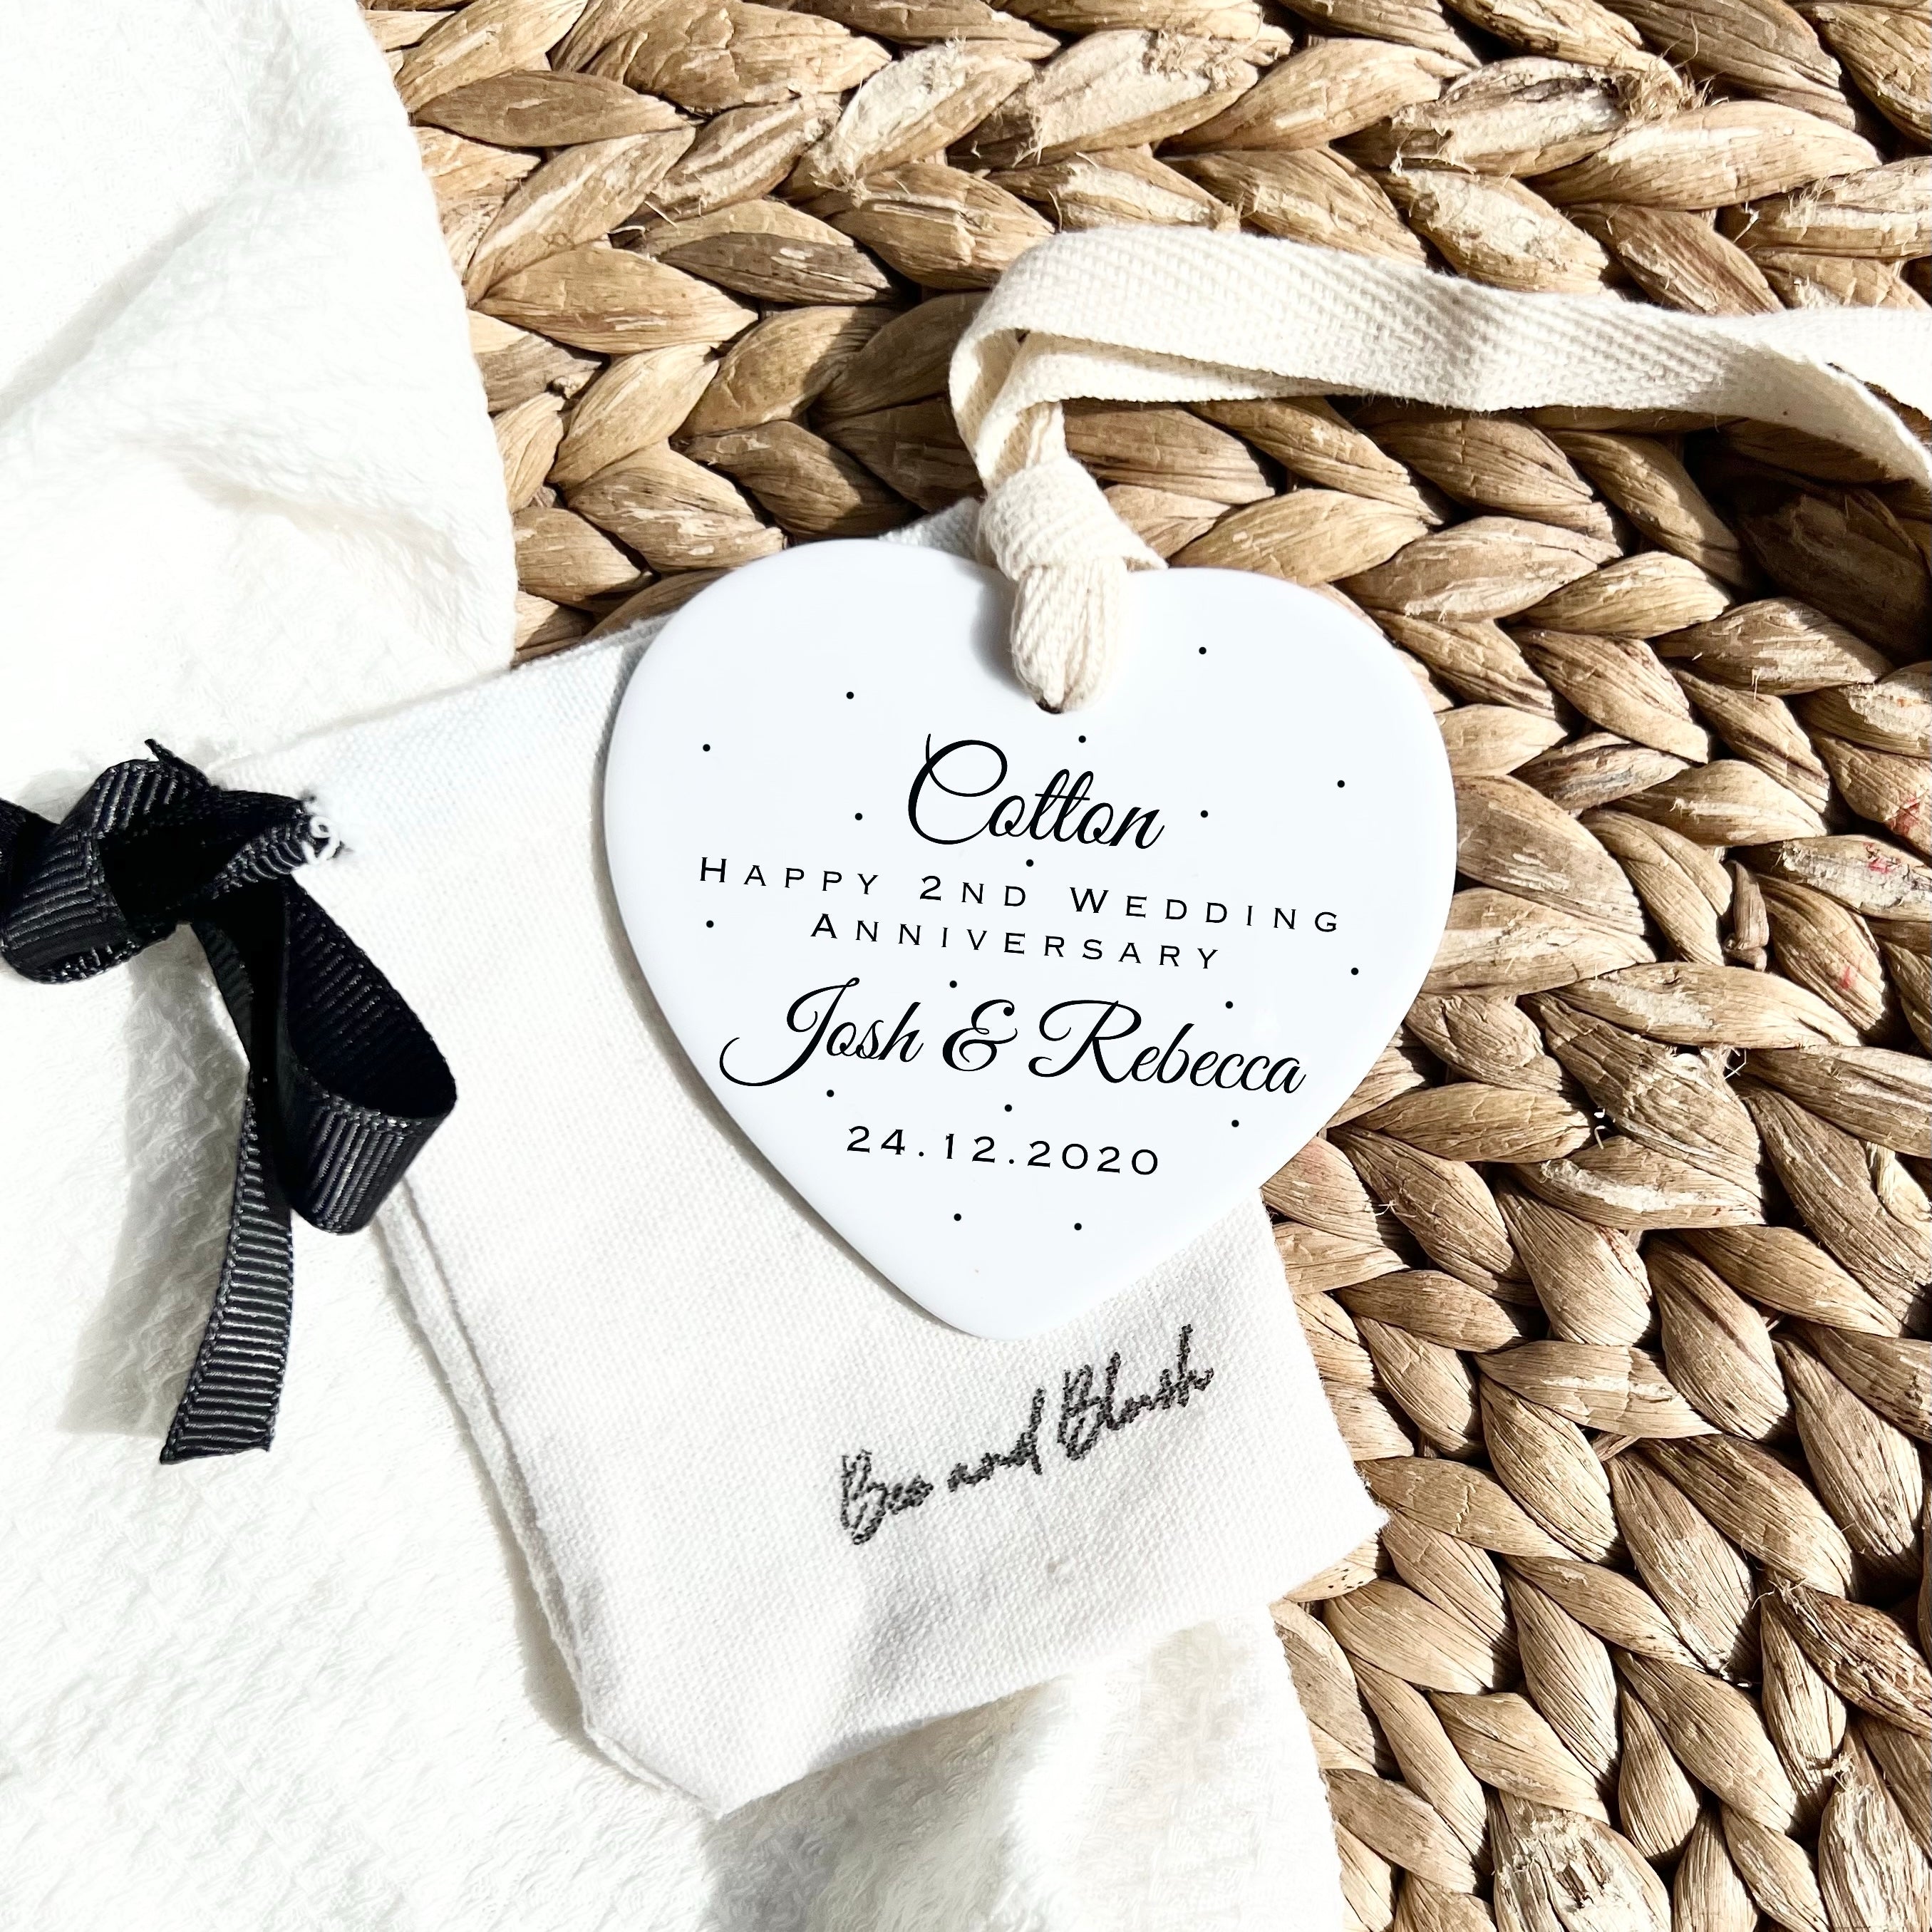 Best Gift Idea Second Wedding Anniversary Gift Guide: Cotton Gift Ideas for  Year Nr 2